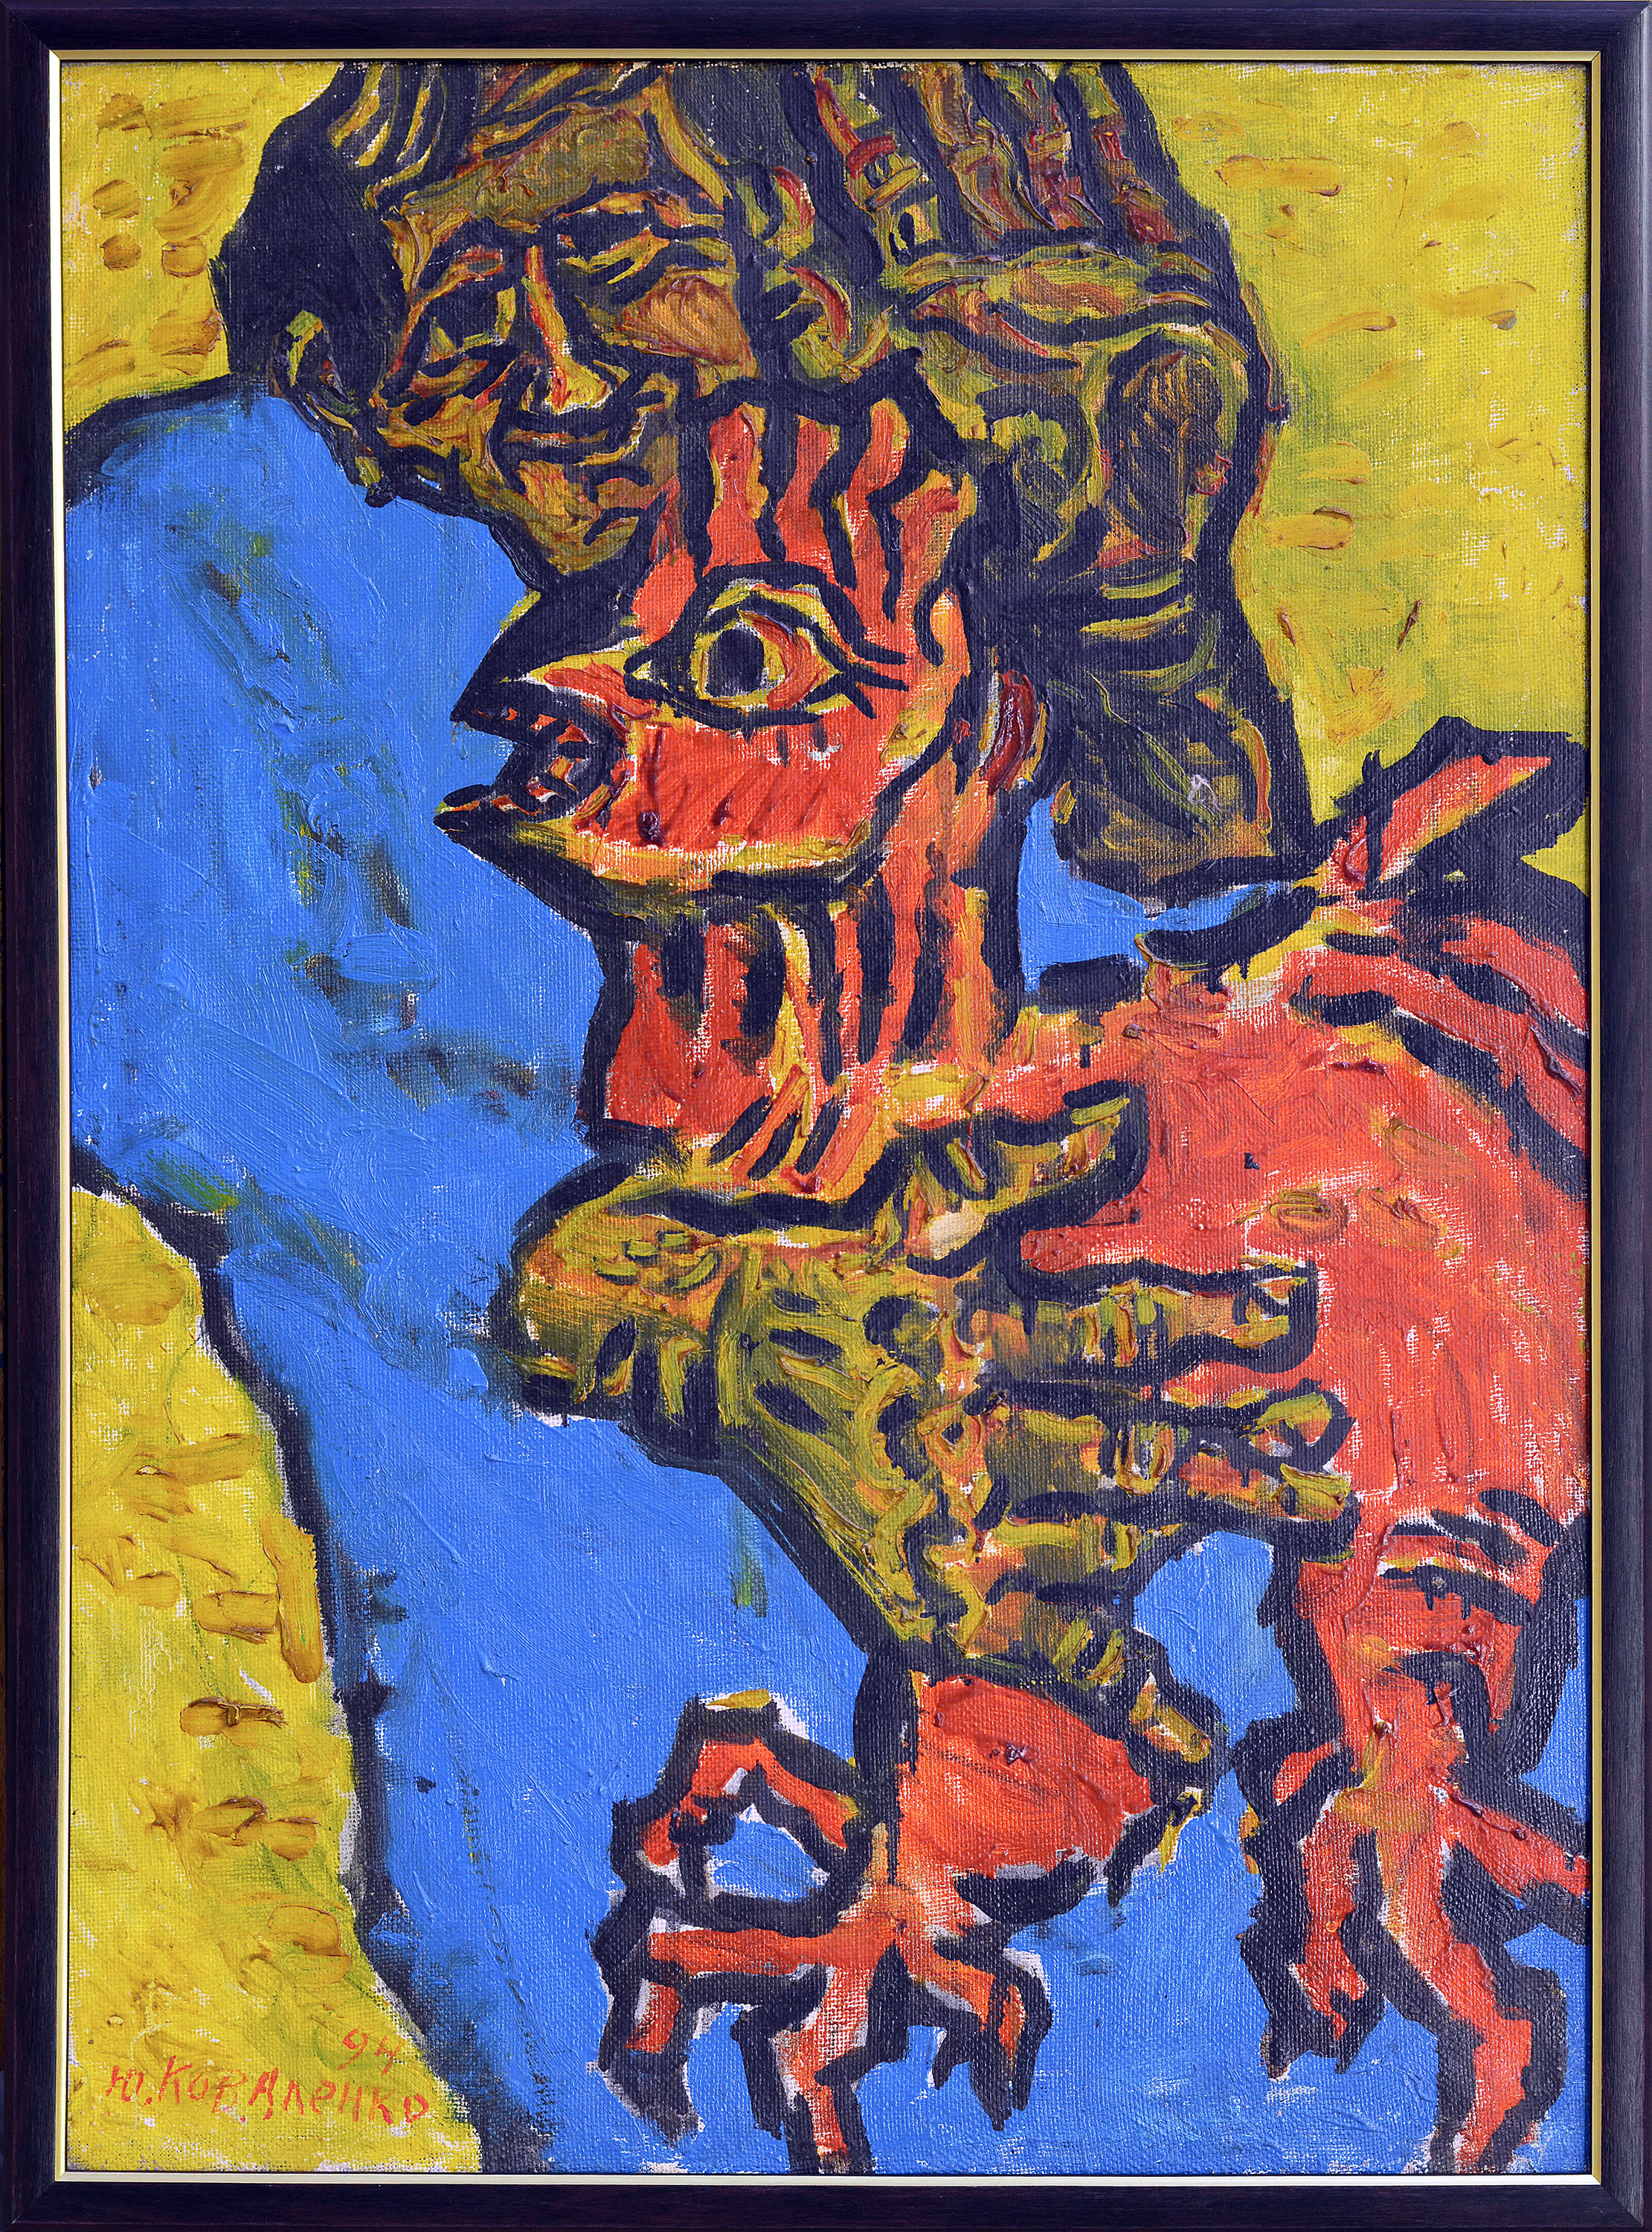 "Portrait with a cock", 1994 - 1